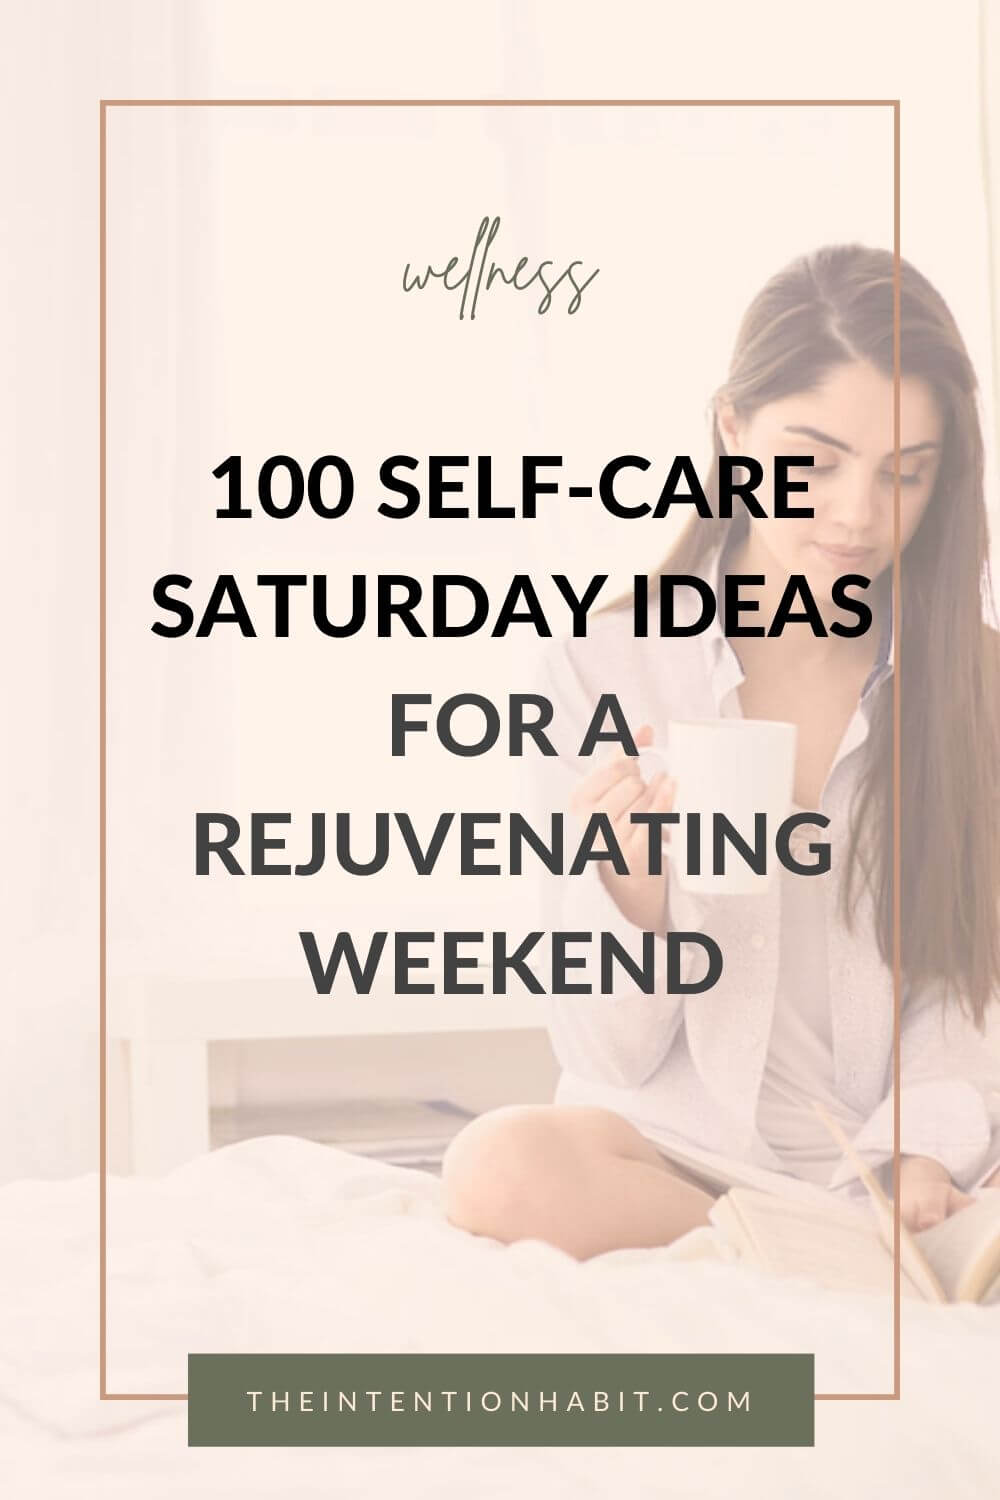 100 self-care Saturday ideas for a rejuvenating weekend